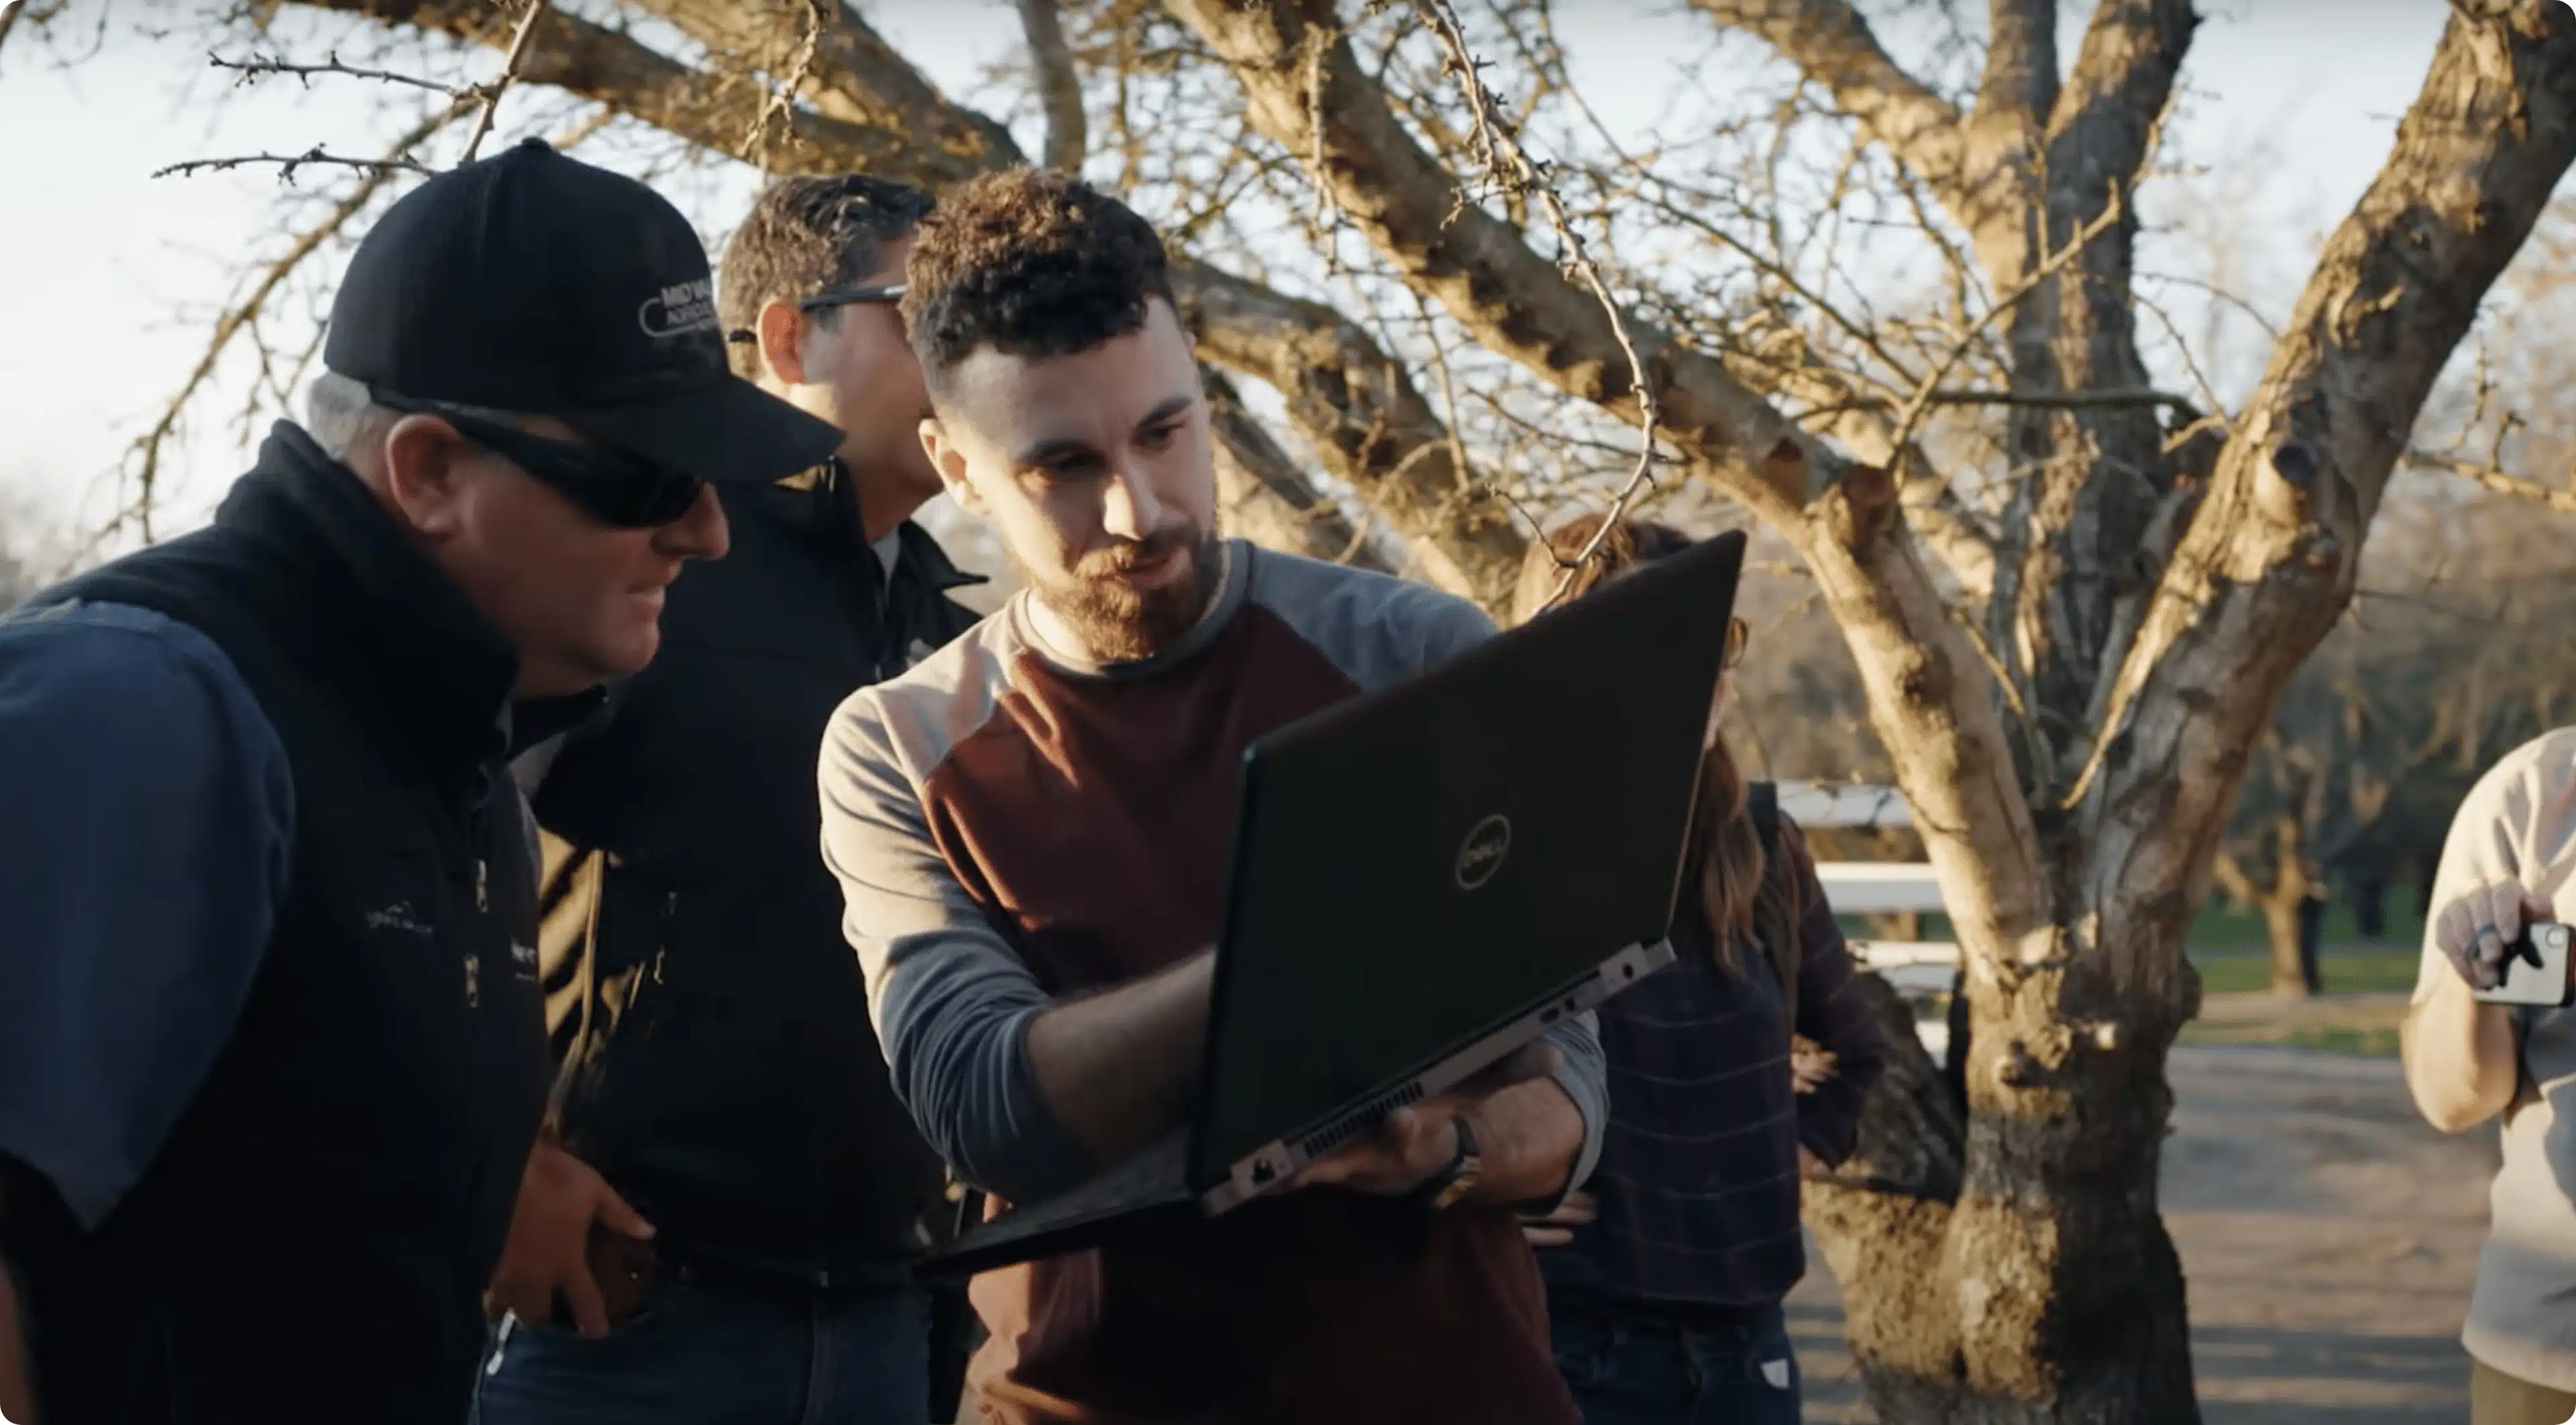 A man shows a computer to another man in a field